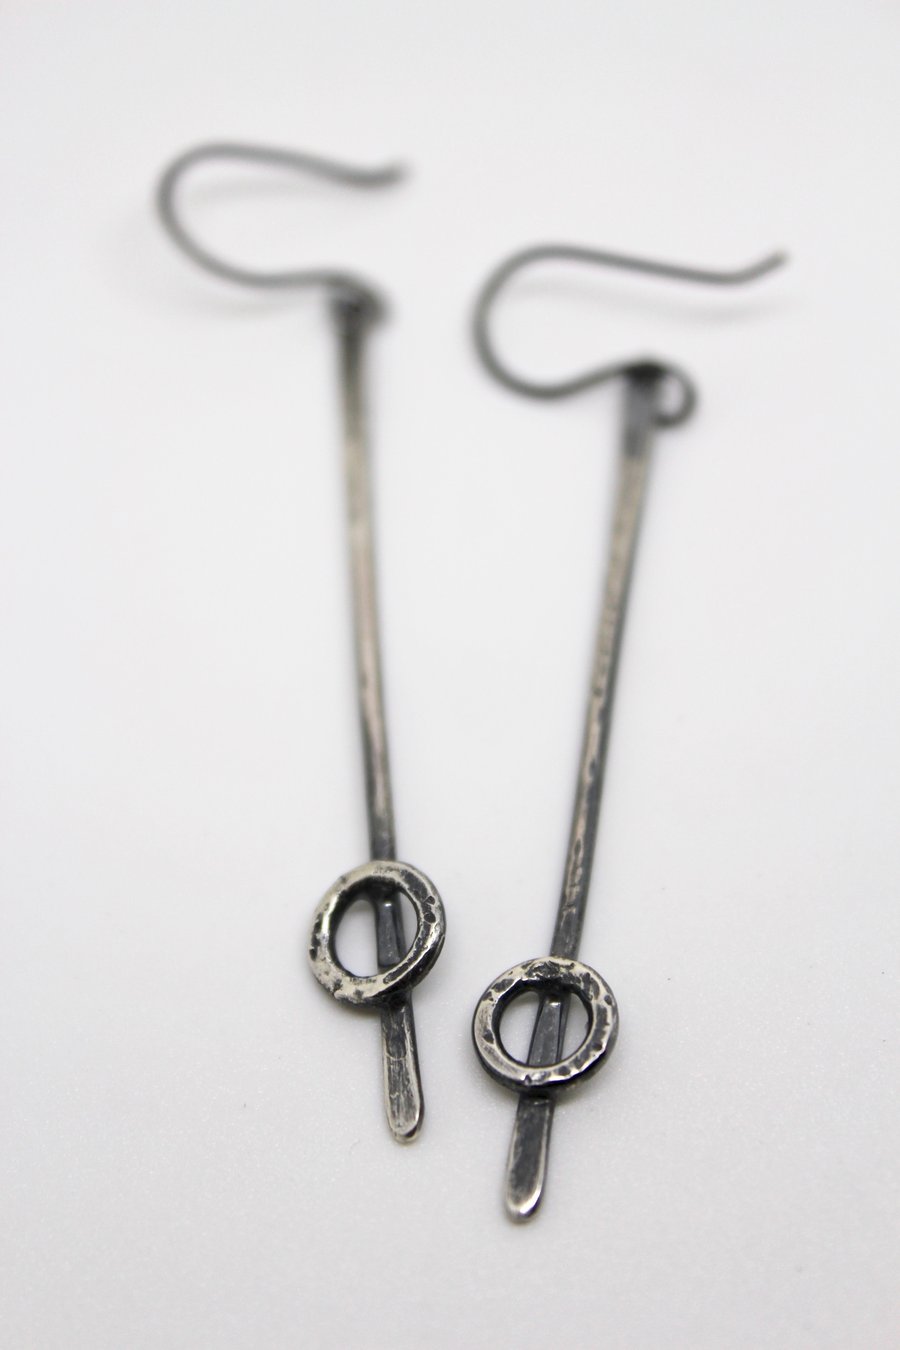 Long silver earrings, long oxidised silver earrings with circle, hammered silver